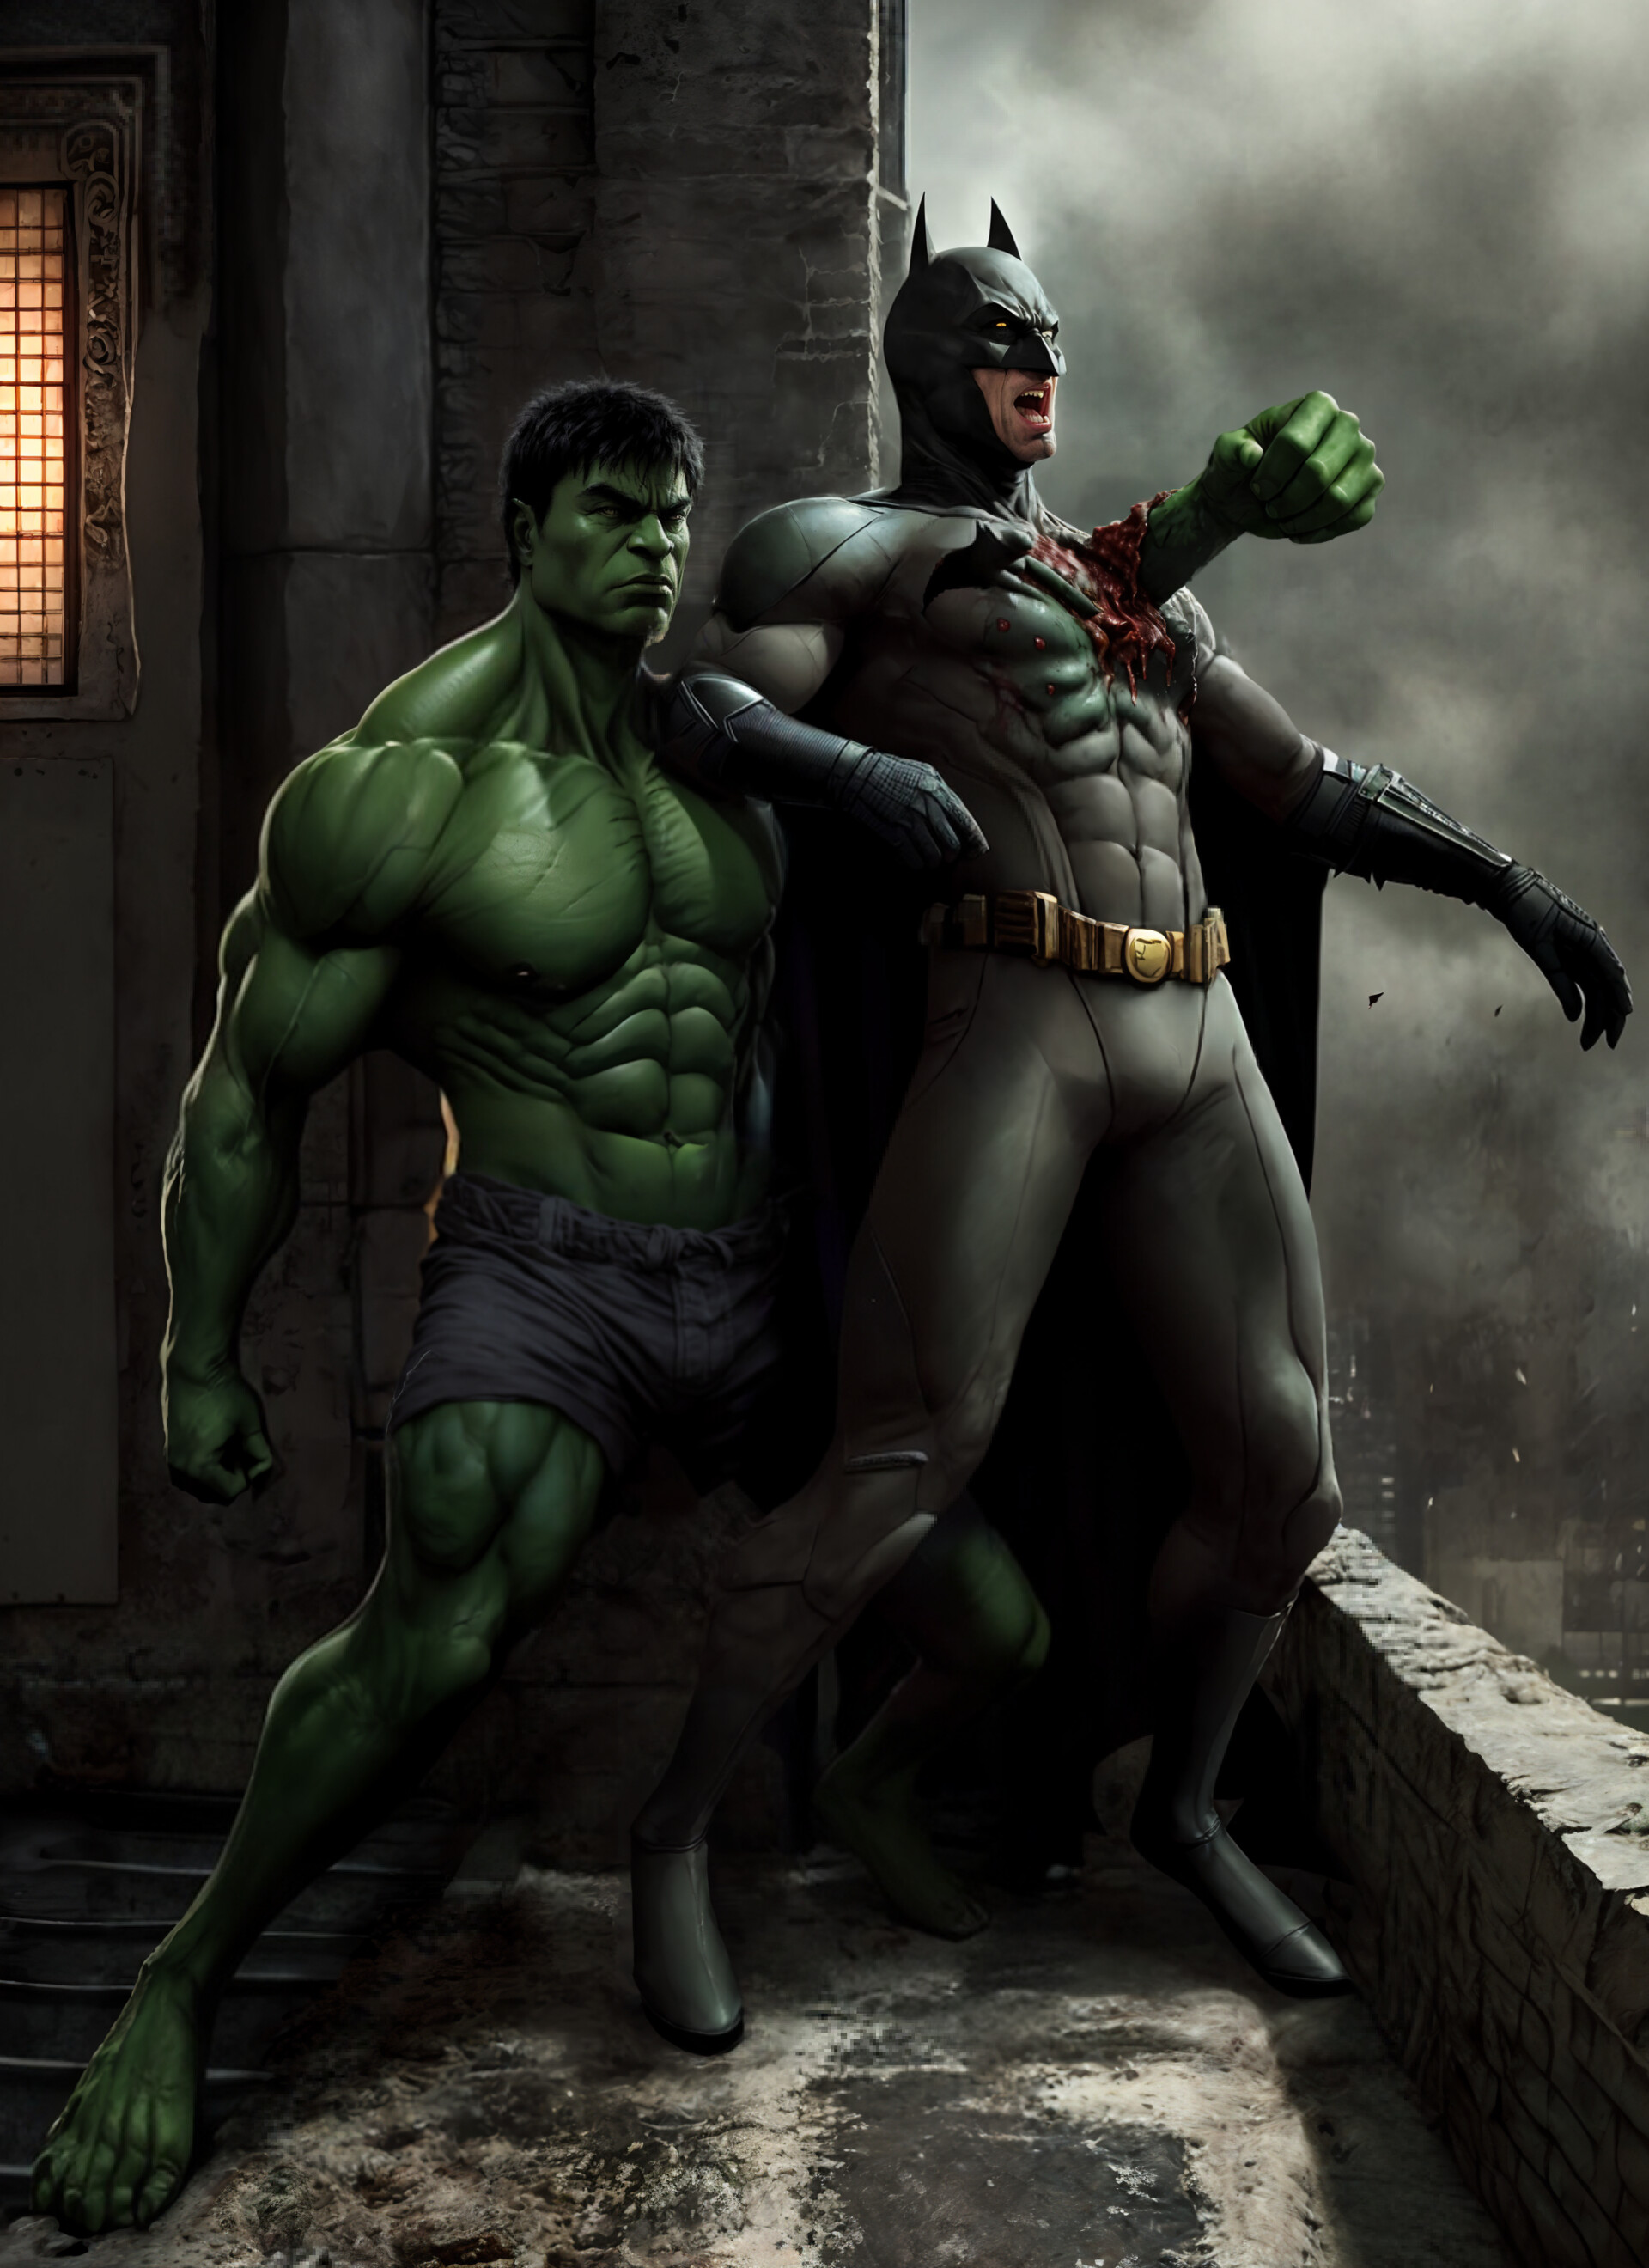 Which is your favorite? Hulk, Superman or Batman